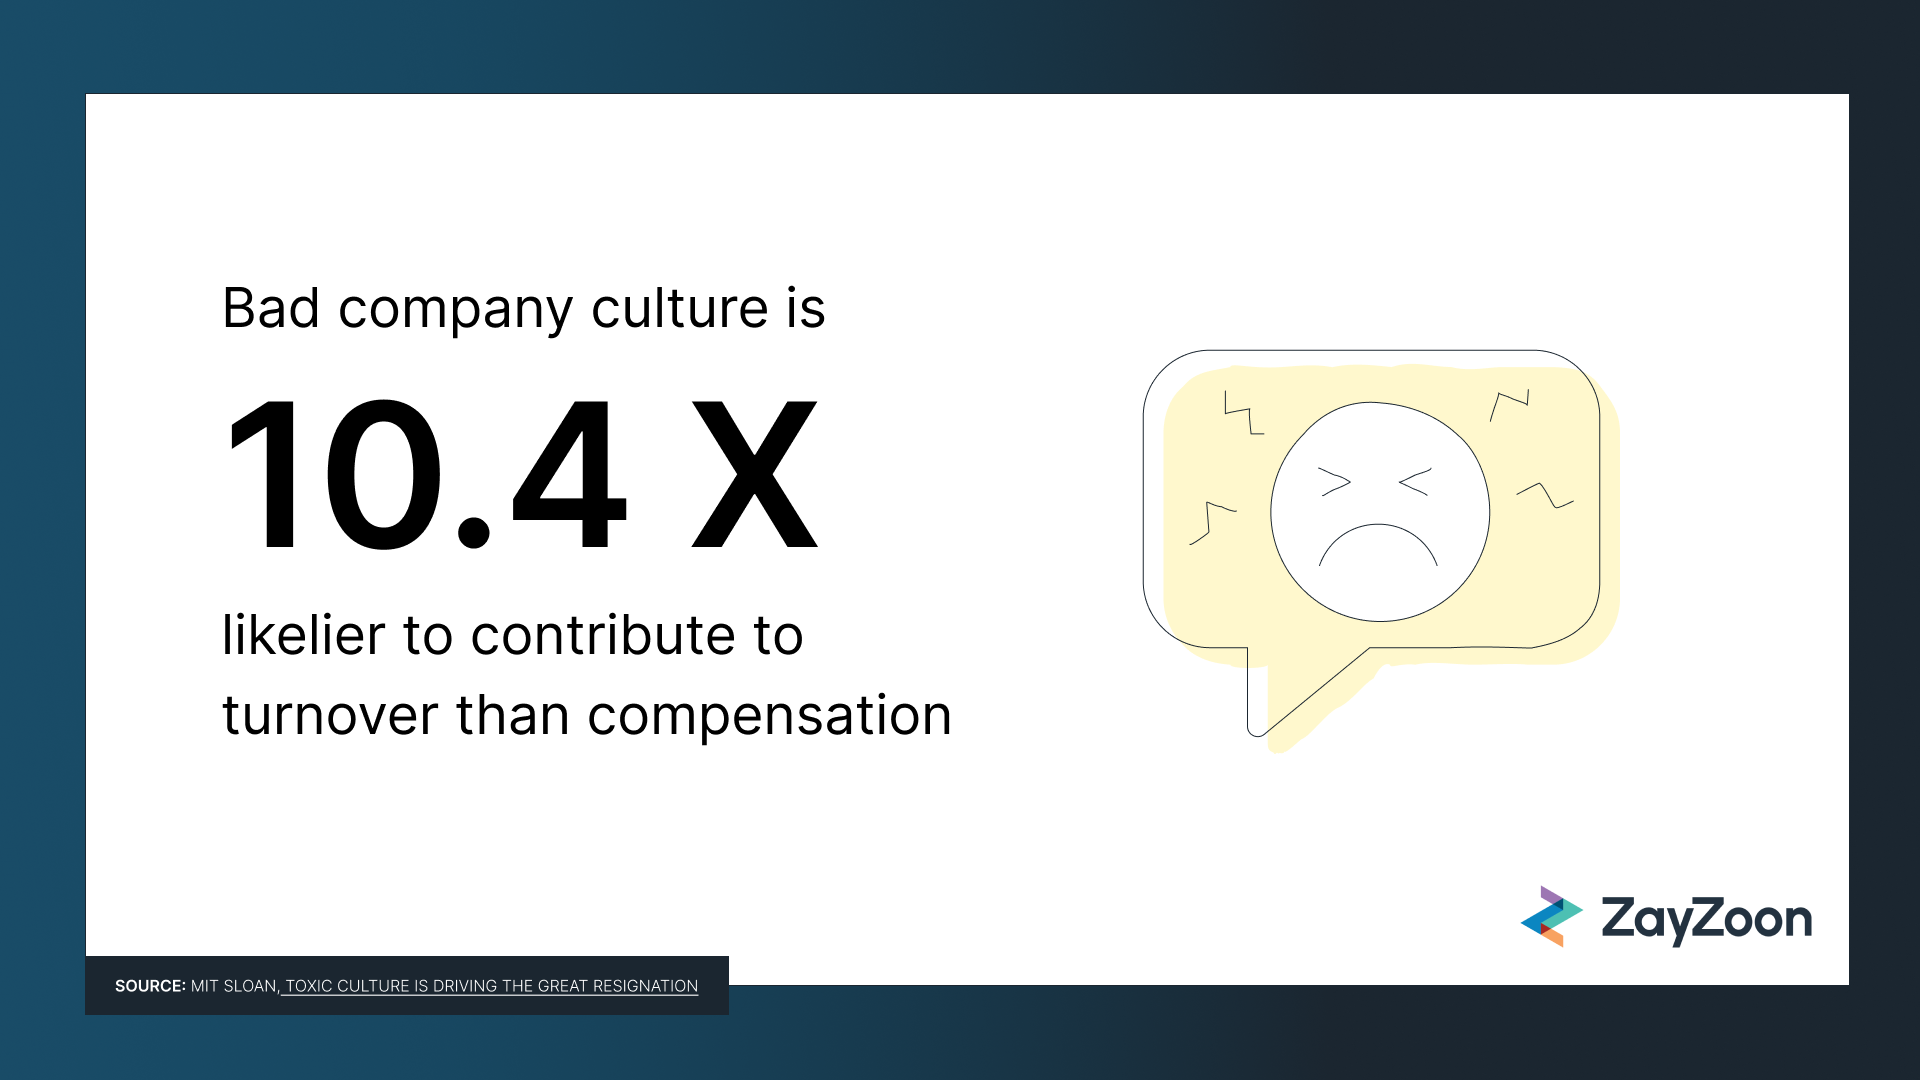 Unhappy face illustration with copy: "Bad company culture is 10.4s likelier to lead to turnover than poor compensation."